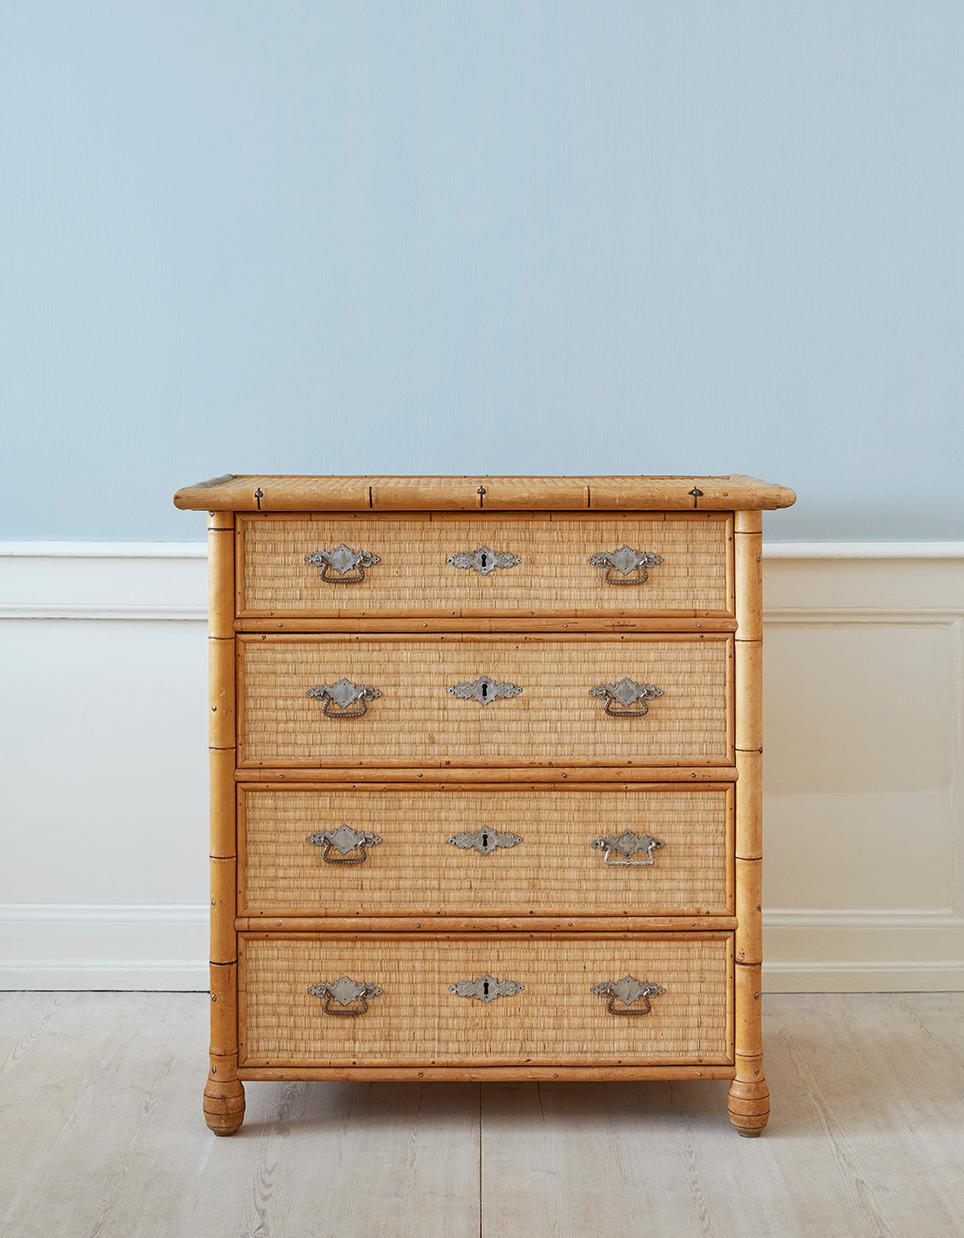 Sweden, 19th Century

Chest of drawers in Japanese straw and beech wood.

H 91 x W 85 x D 50 cm